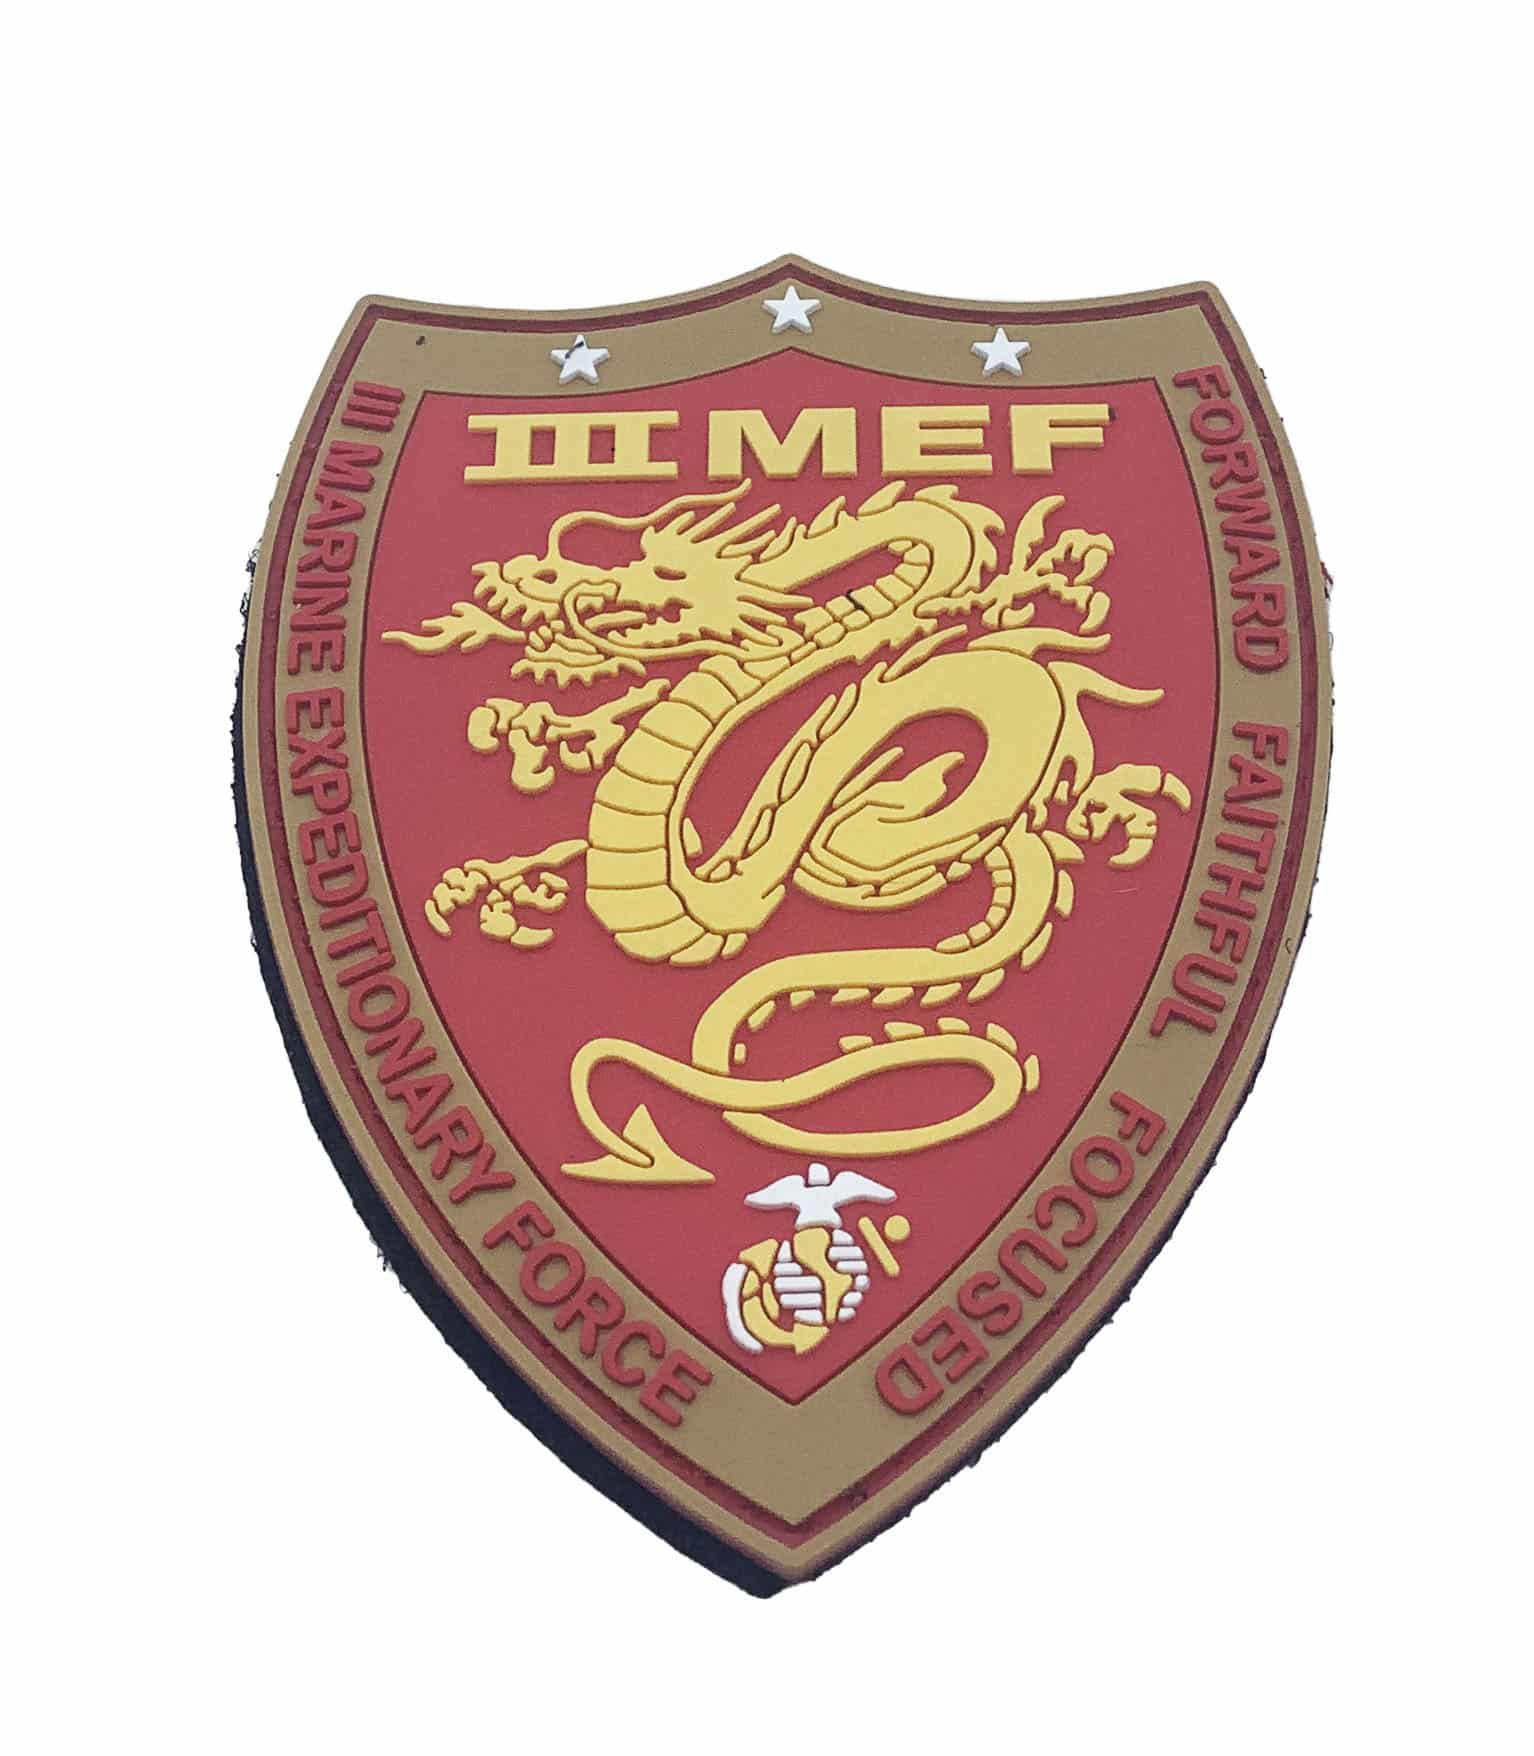 3rd MEF Marine Expeditionary Force PVC Patch – With Hook and Loop